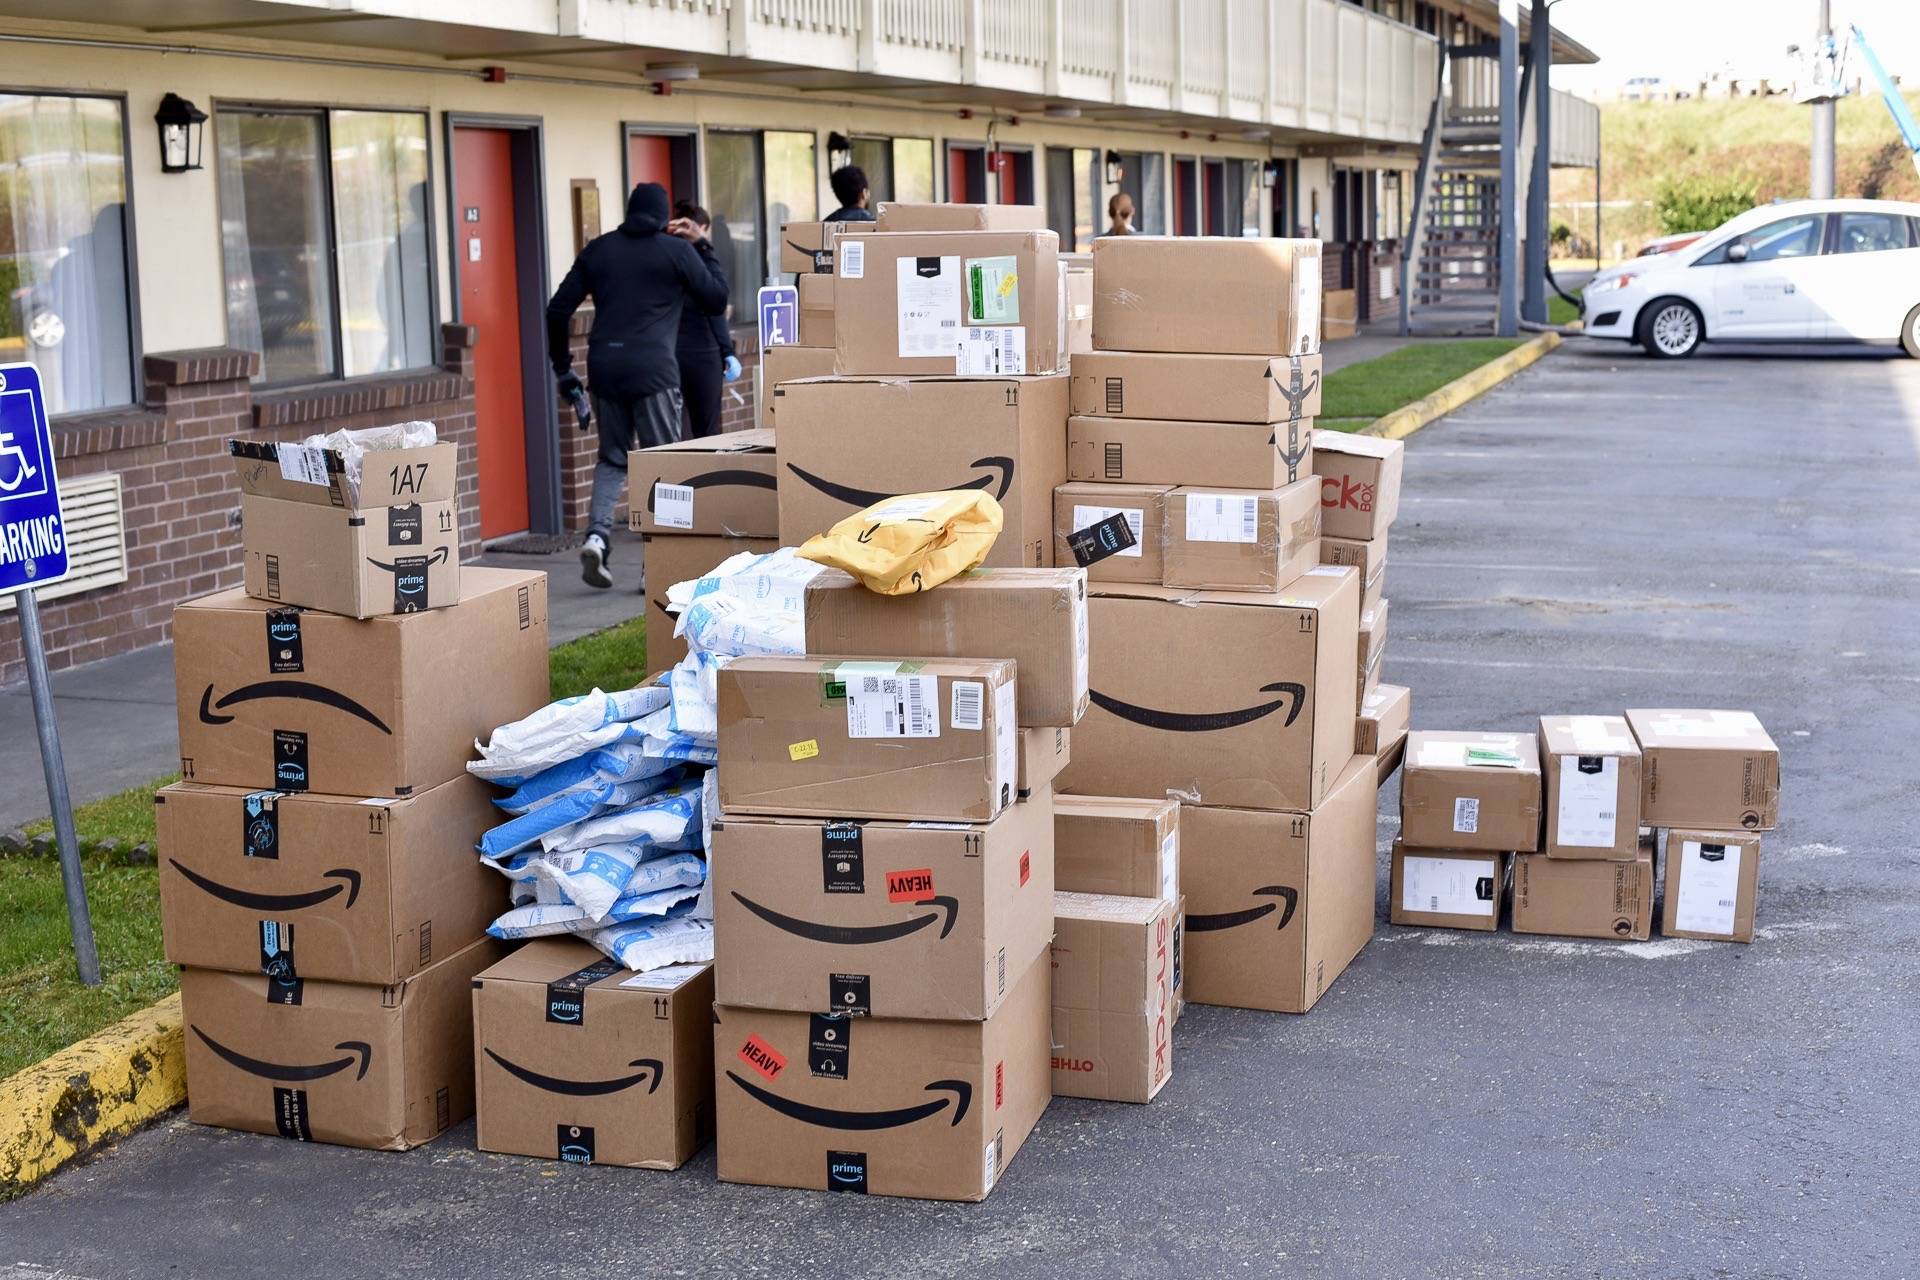 Amazon donates $50,000 in supplies to Kent facility for COVID-19 response